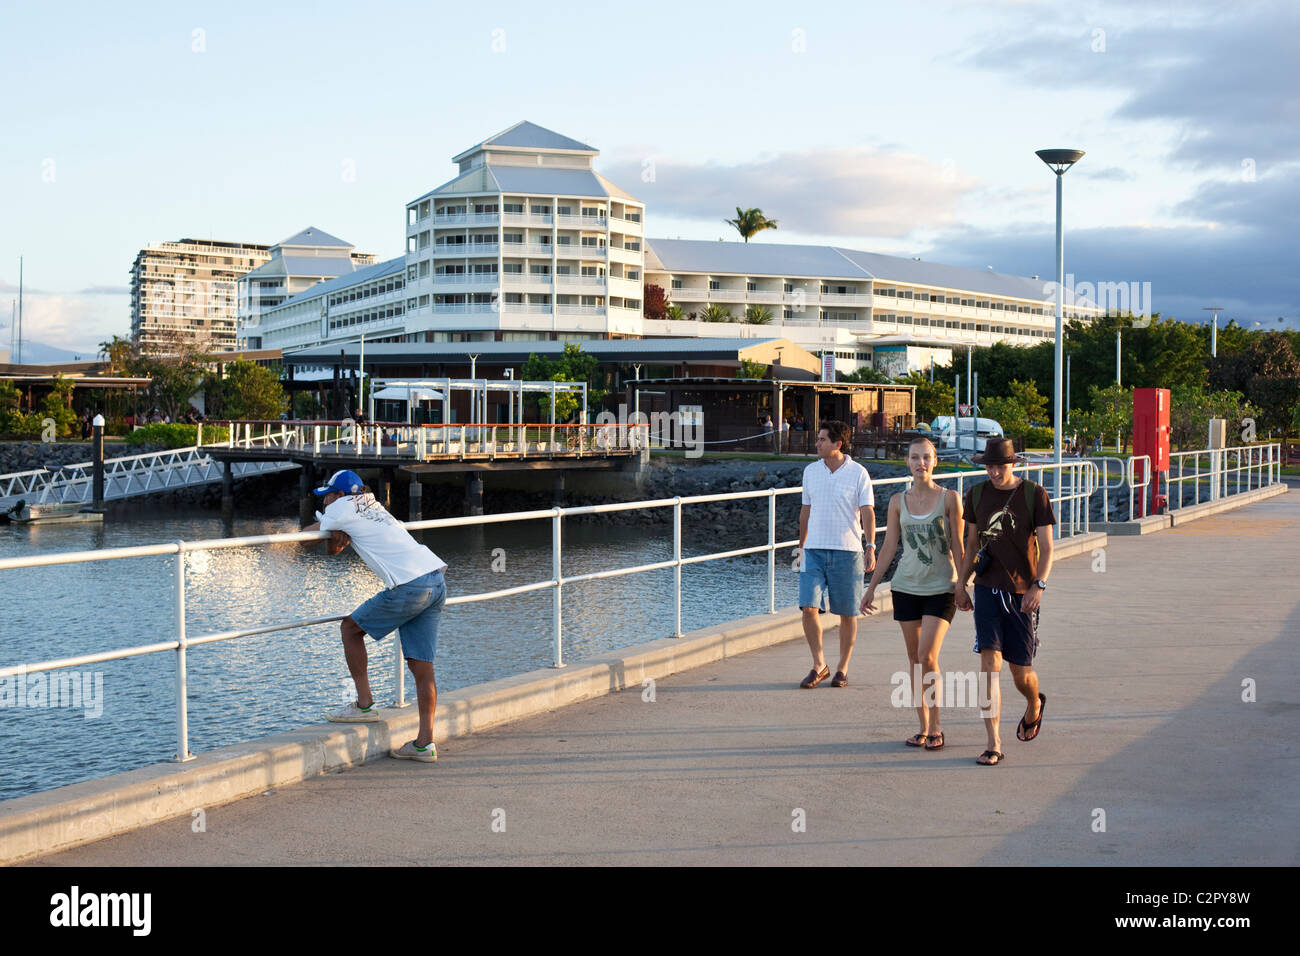 Tourists walking along Marlin Marina jetty with Shangri-La Hotel in background. Cairns, Queensland, Australia Stock Photo